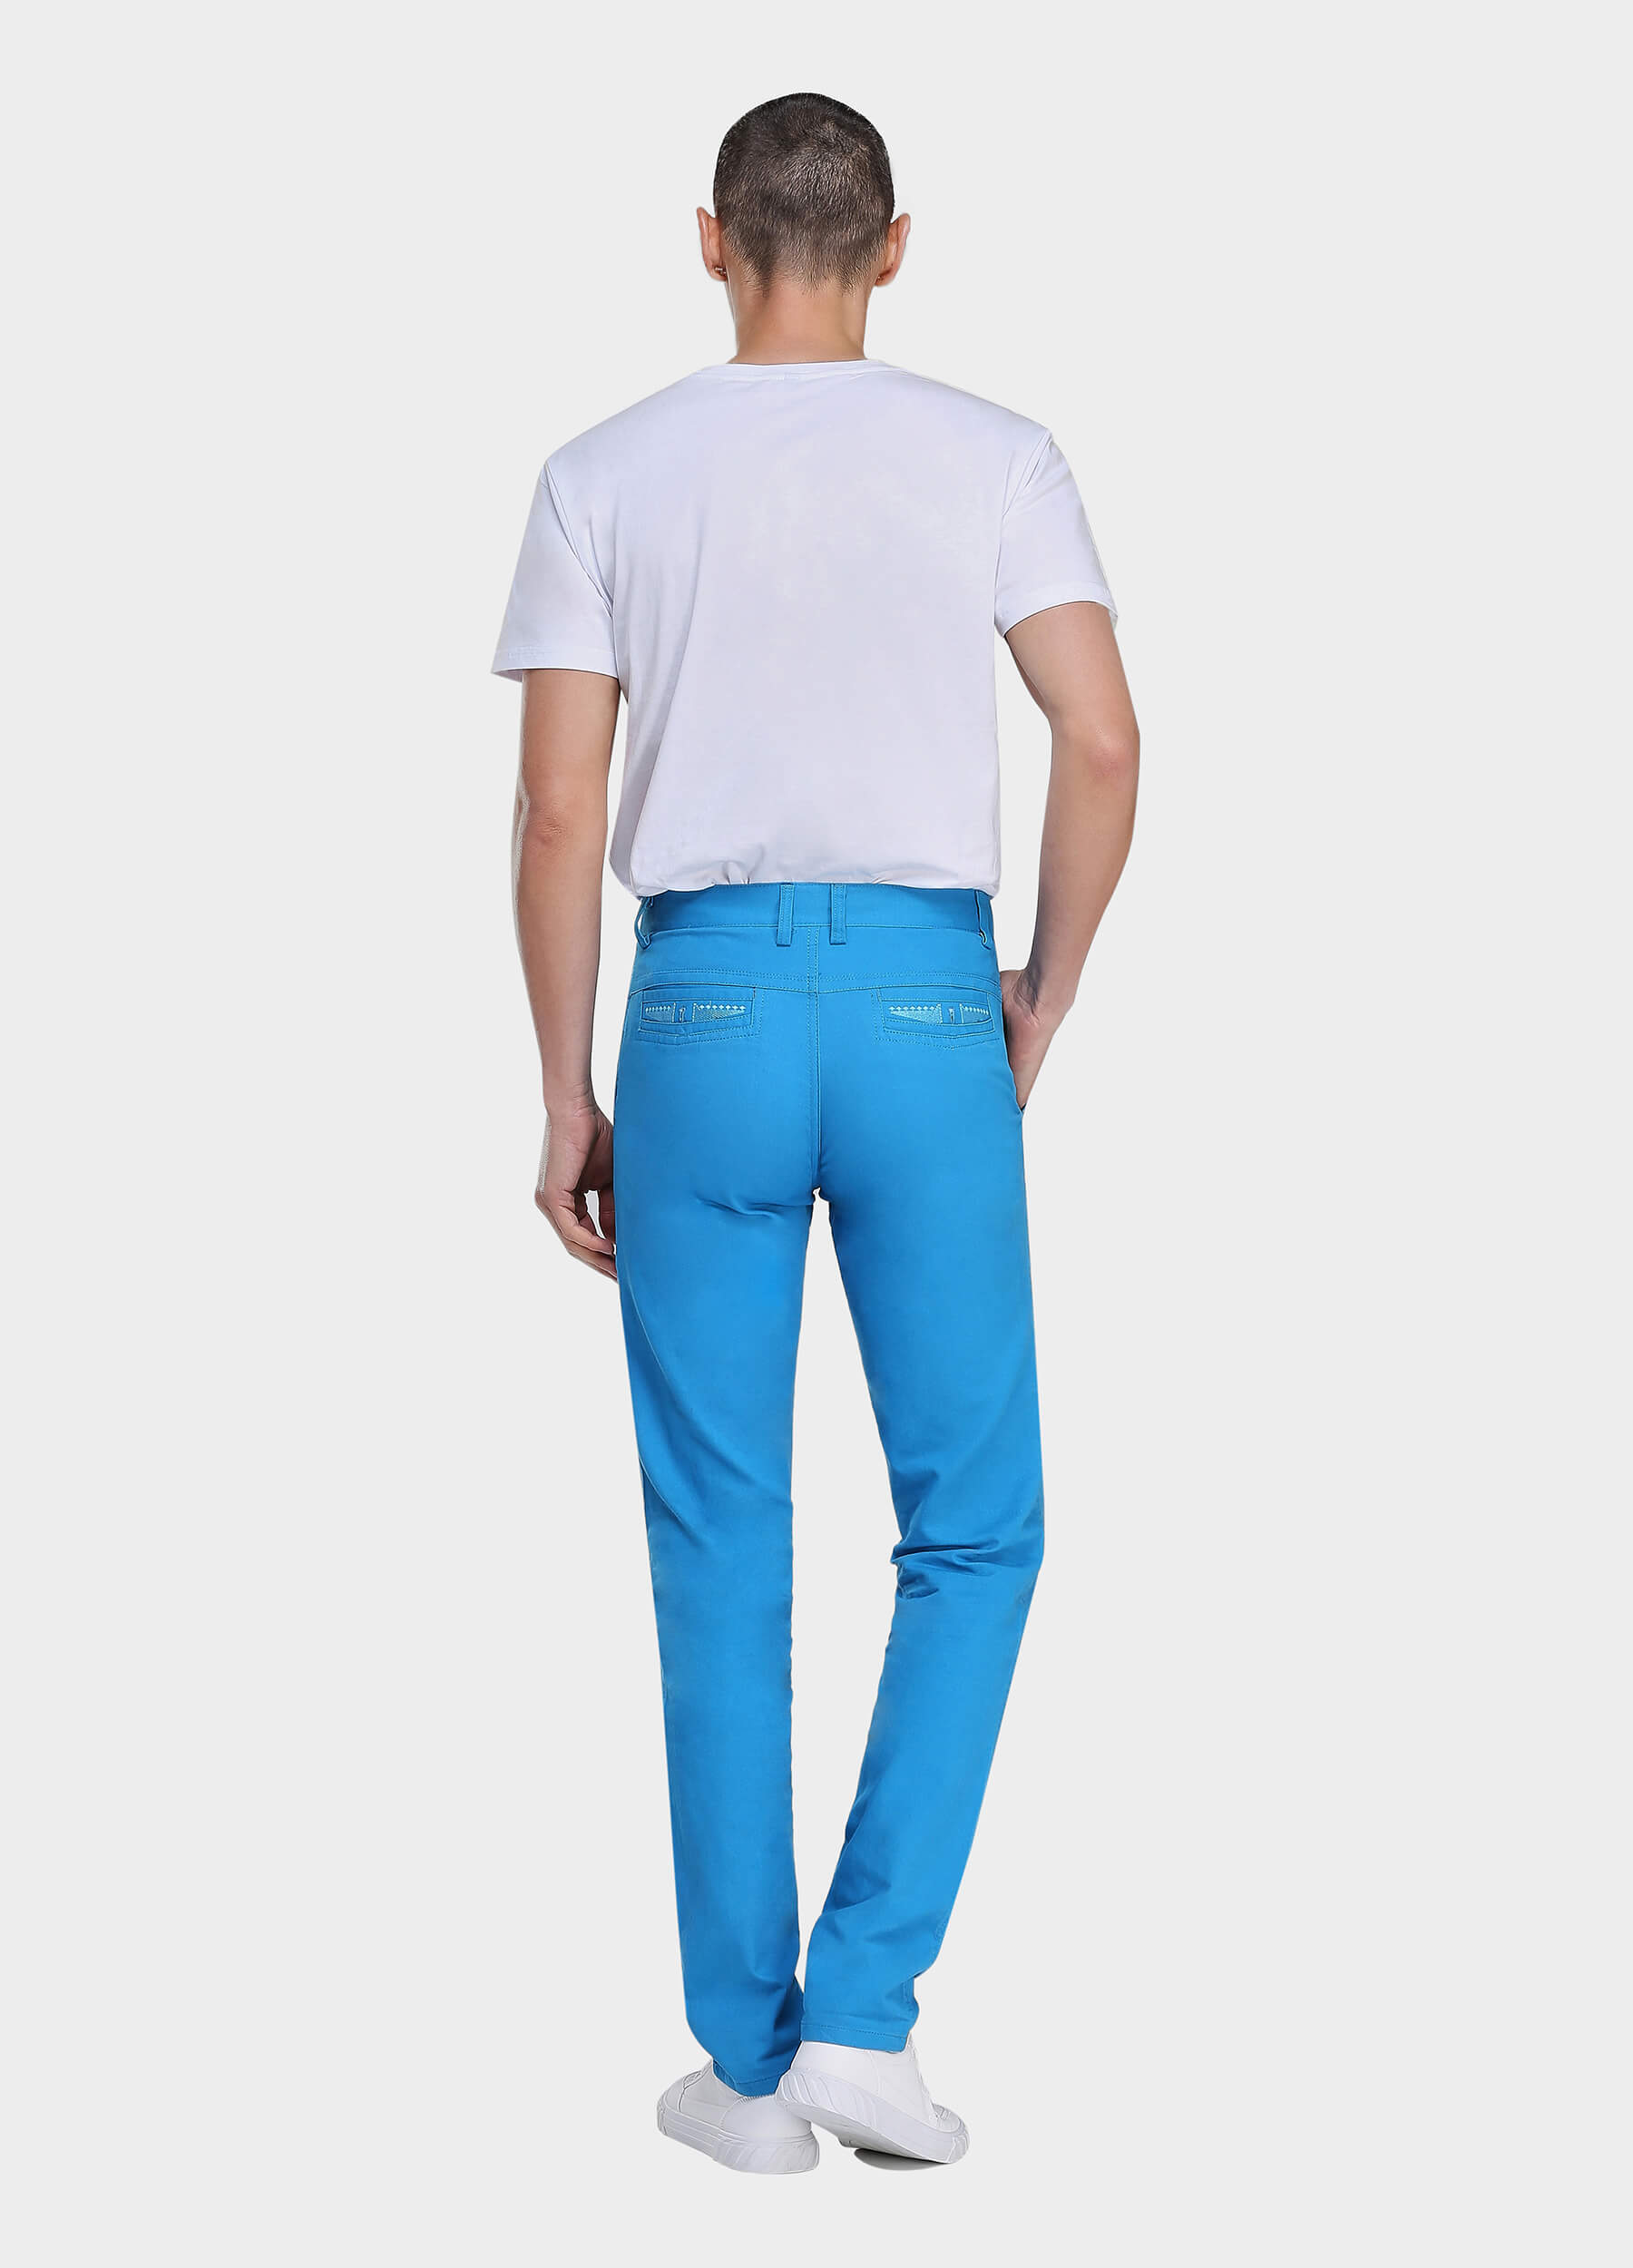 1PA1 Men's Fall Straight Leg Zip Fly Button Closure Slant Pocket Casual Trousers-Blue back view